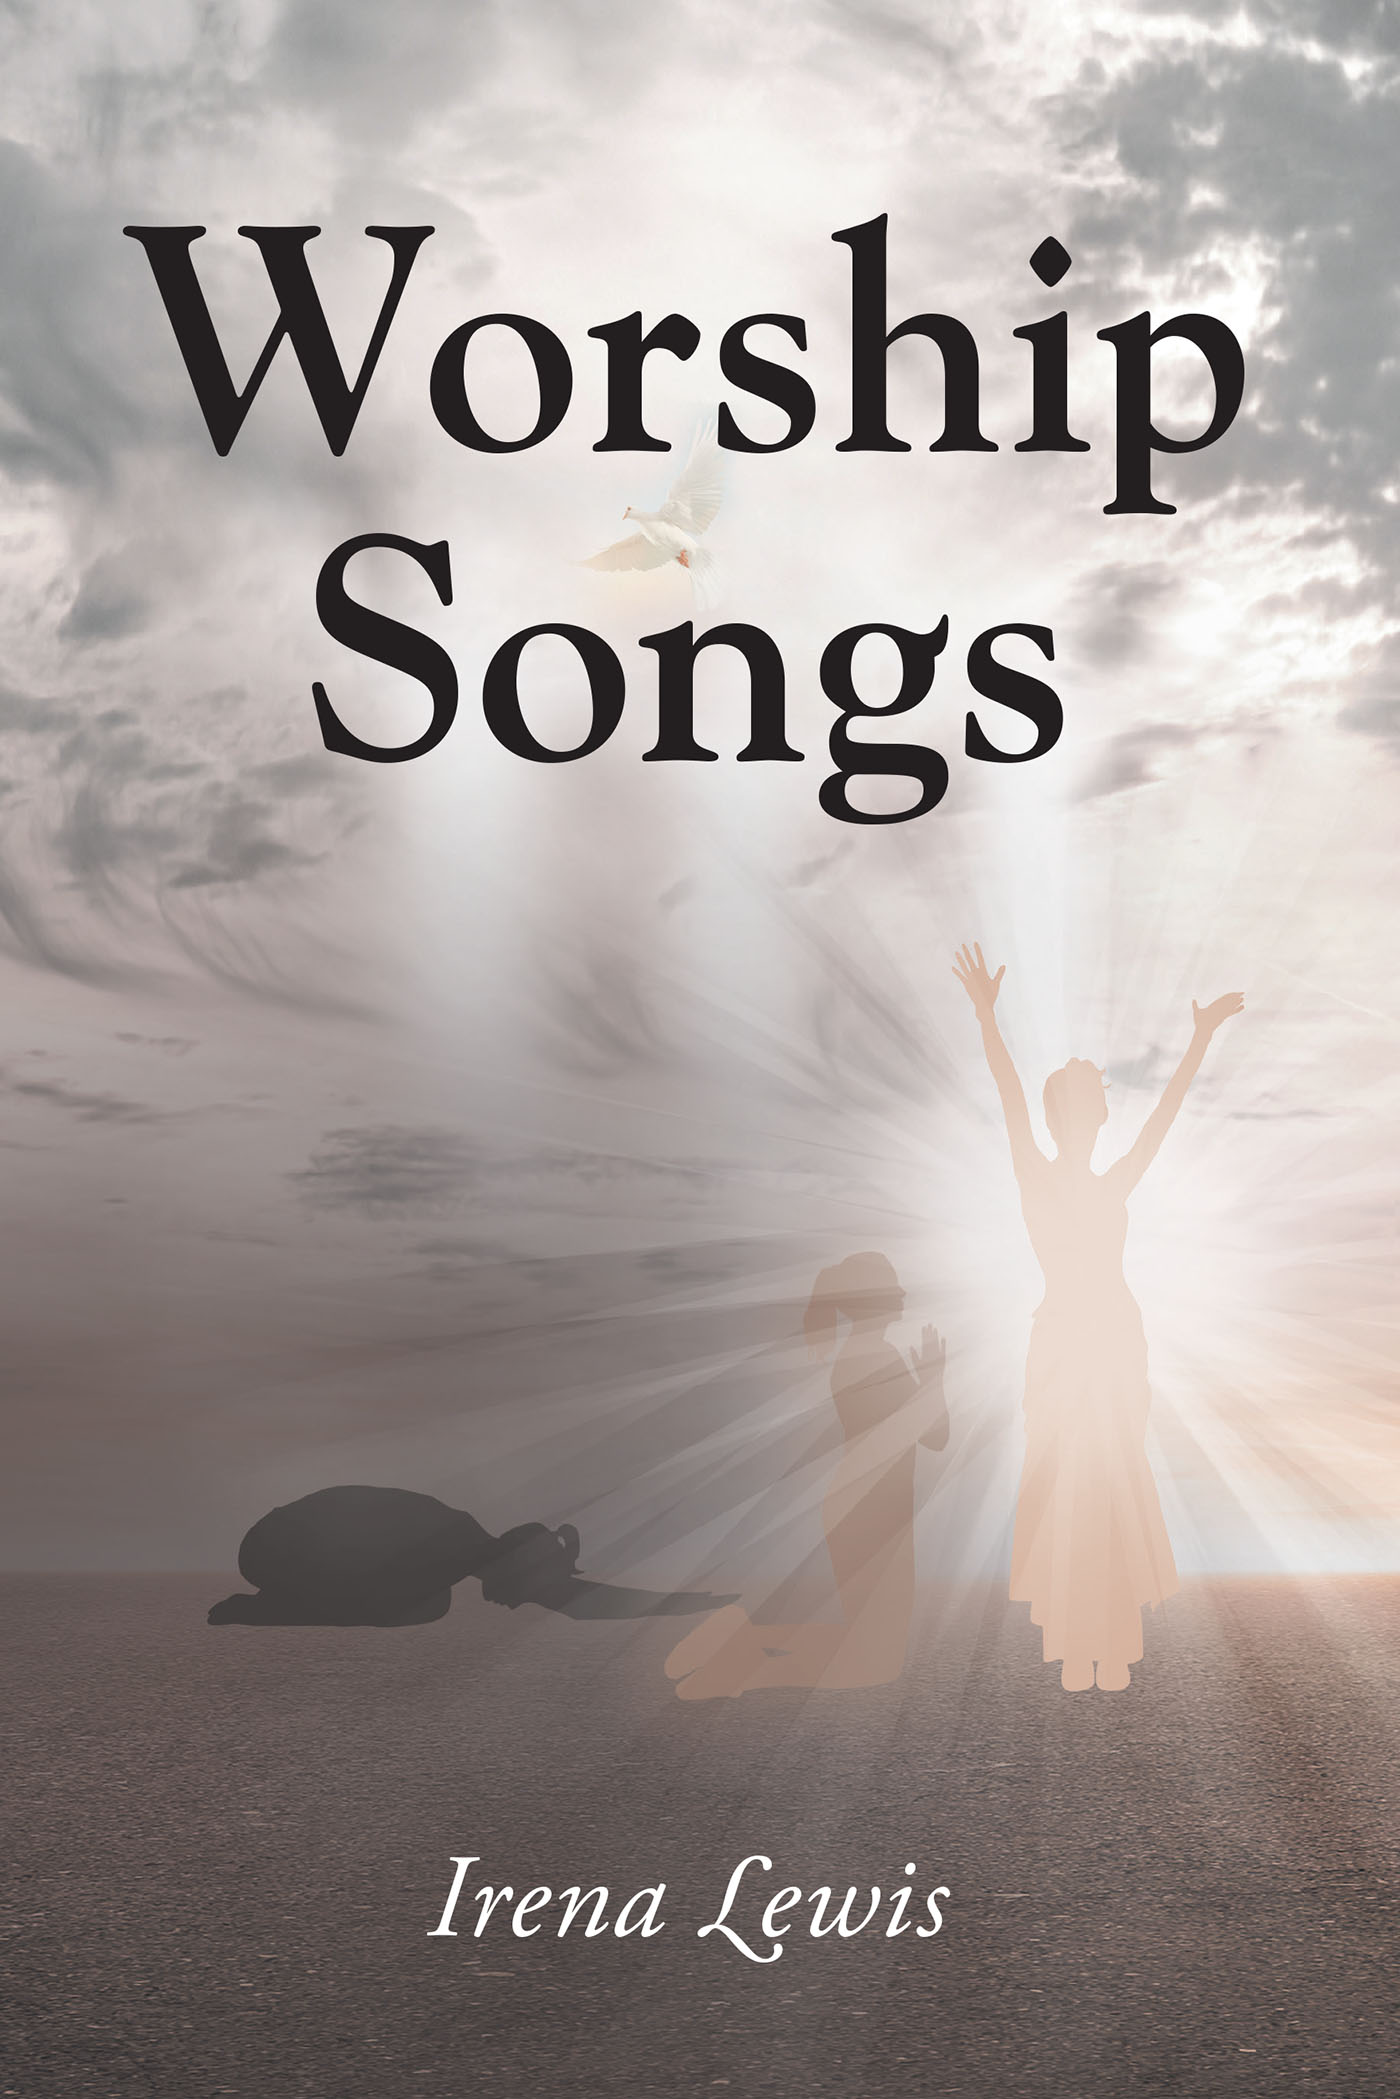 Irena Lewis’s Newly Released "Worship Songs" is an Inspiring Collection of 200 Songs That Celebrate and Give Praise to God